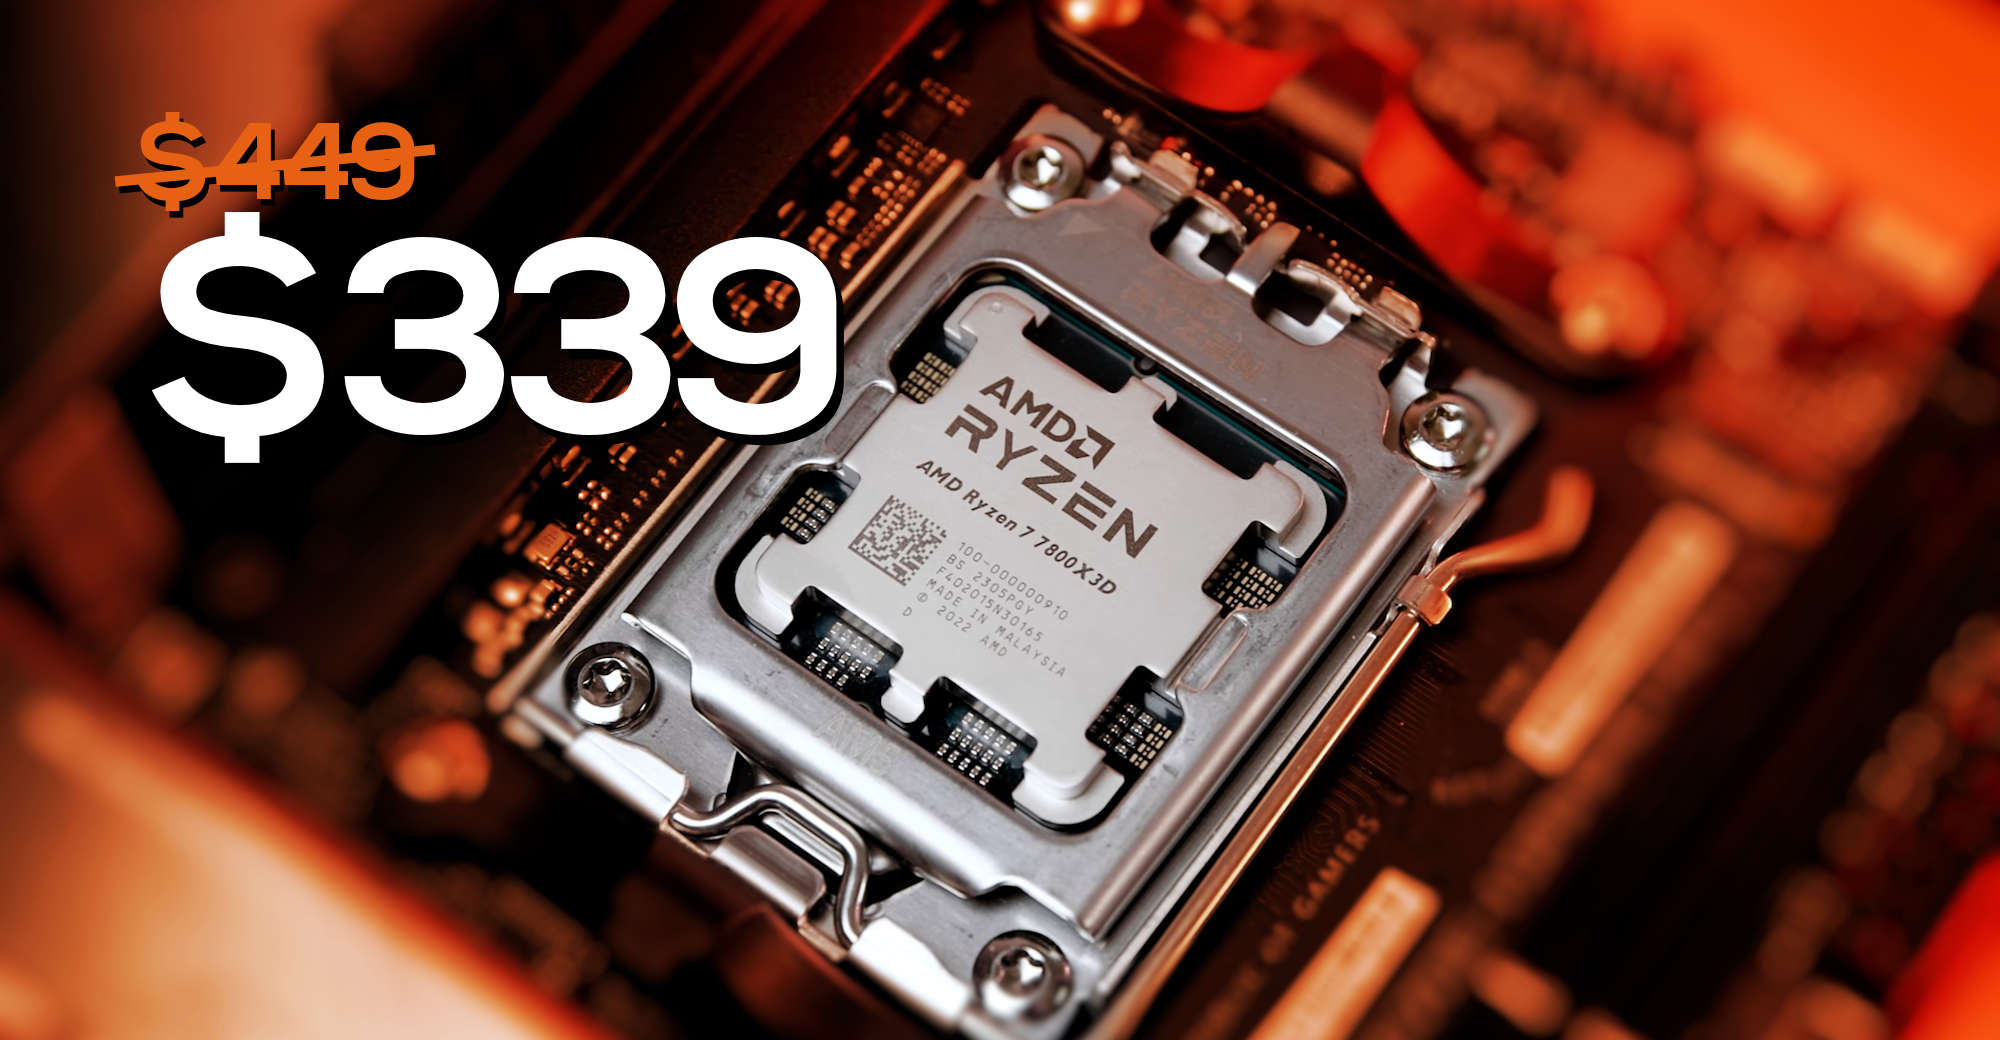 Is the Ryzen 7 7800X3D good? - PC Guide